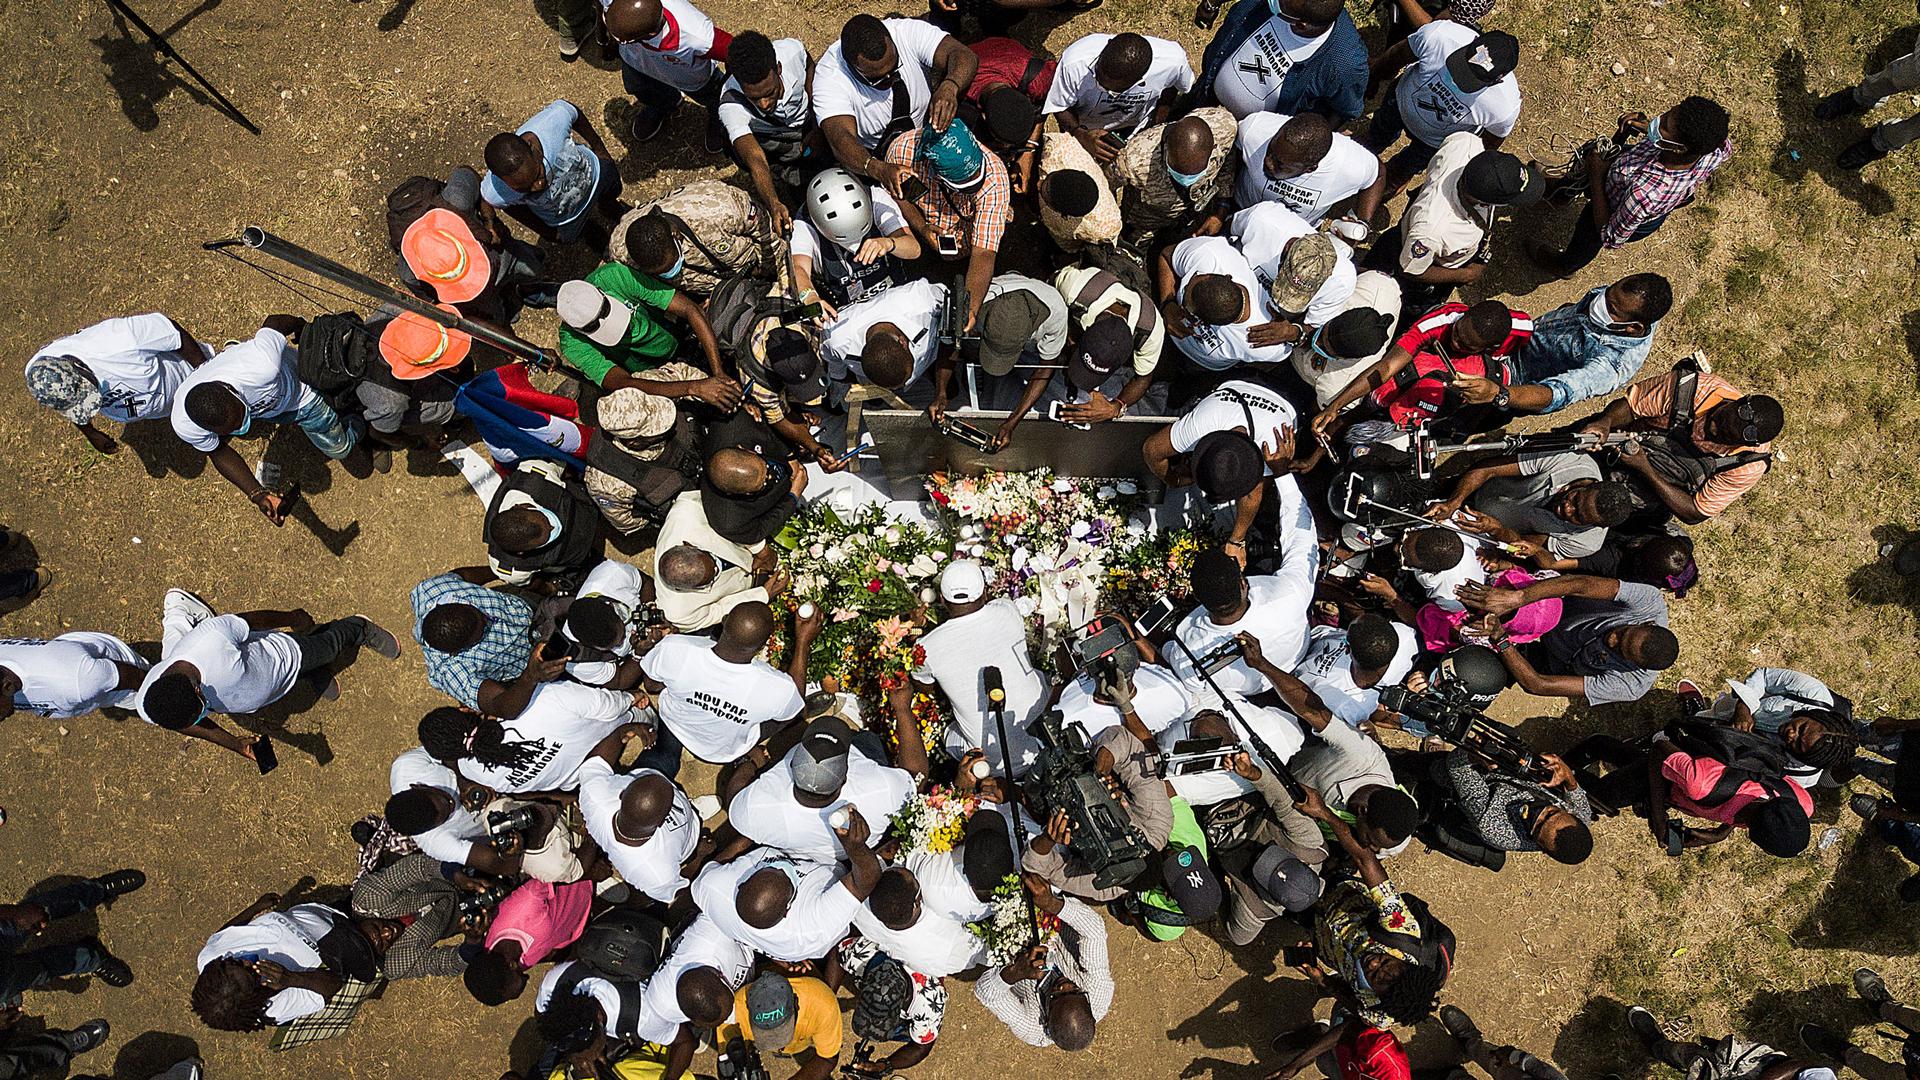 A large group of people are shown from above circling above a memorial of flowers.